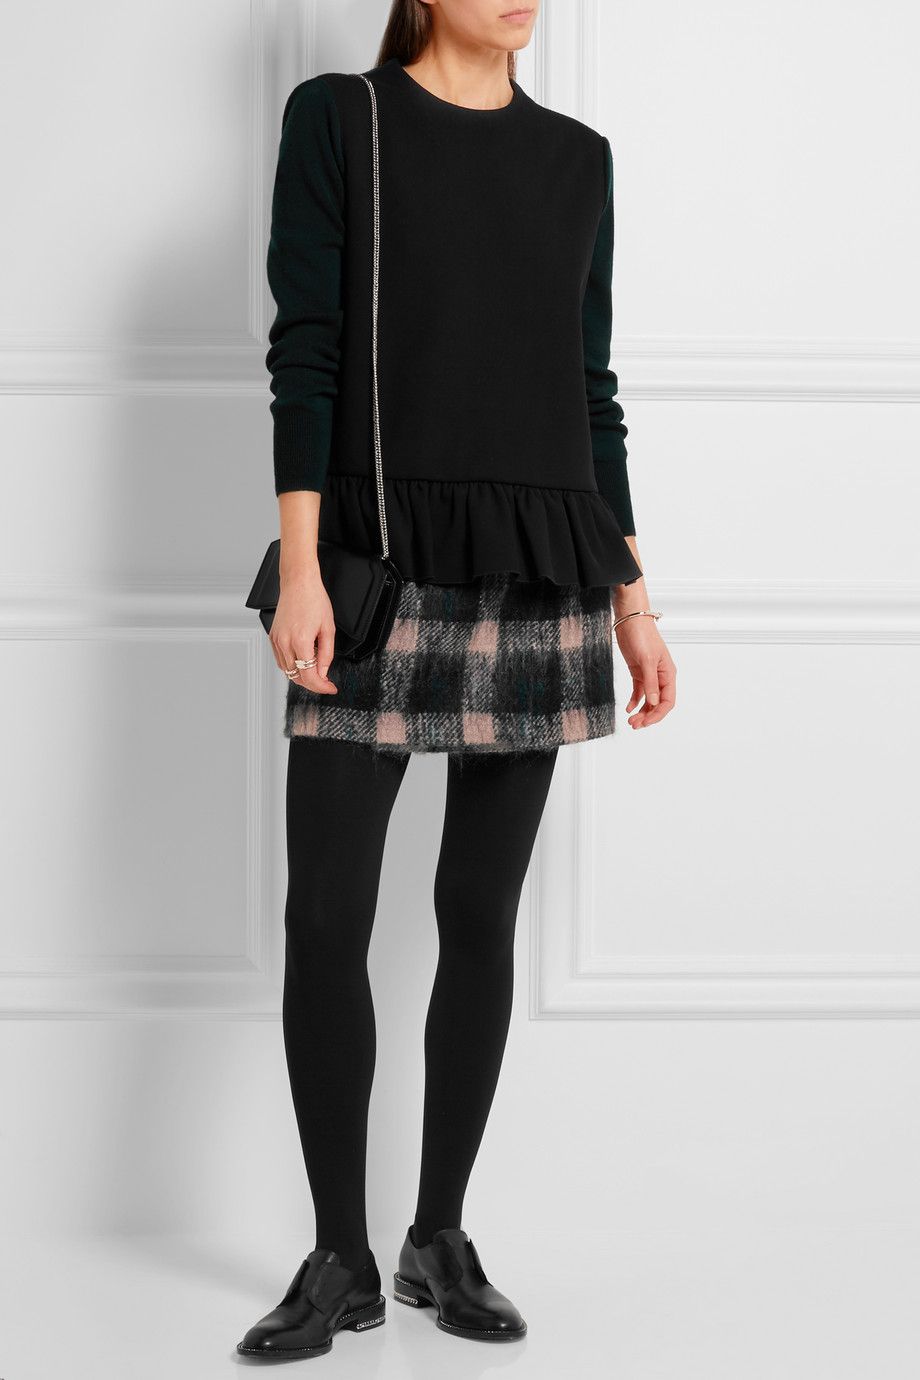 HOW TO STYLE BLACK TIGHTS: 6 CHIC SKIRTS & DRESSES OUTFIT IDEAS FOR WINTER  